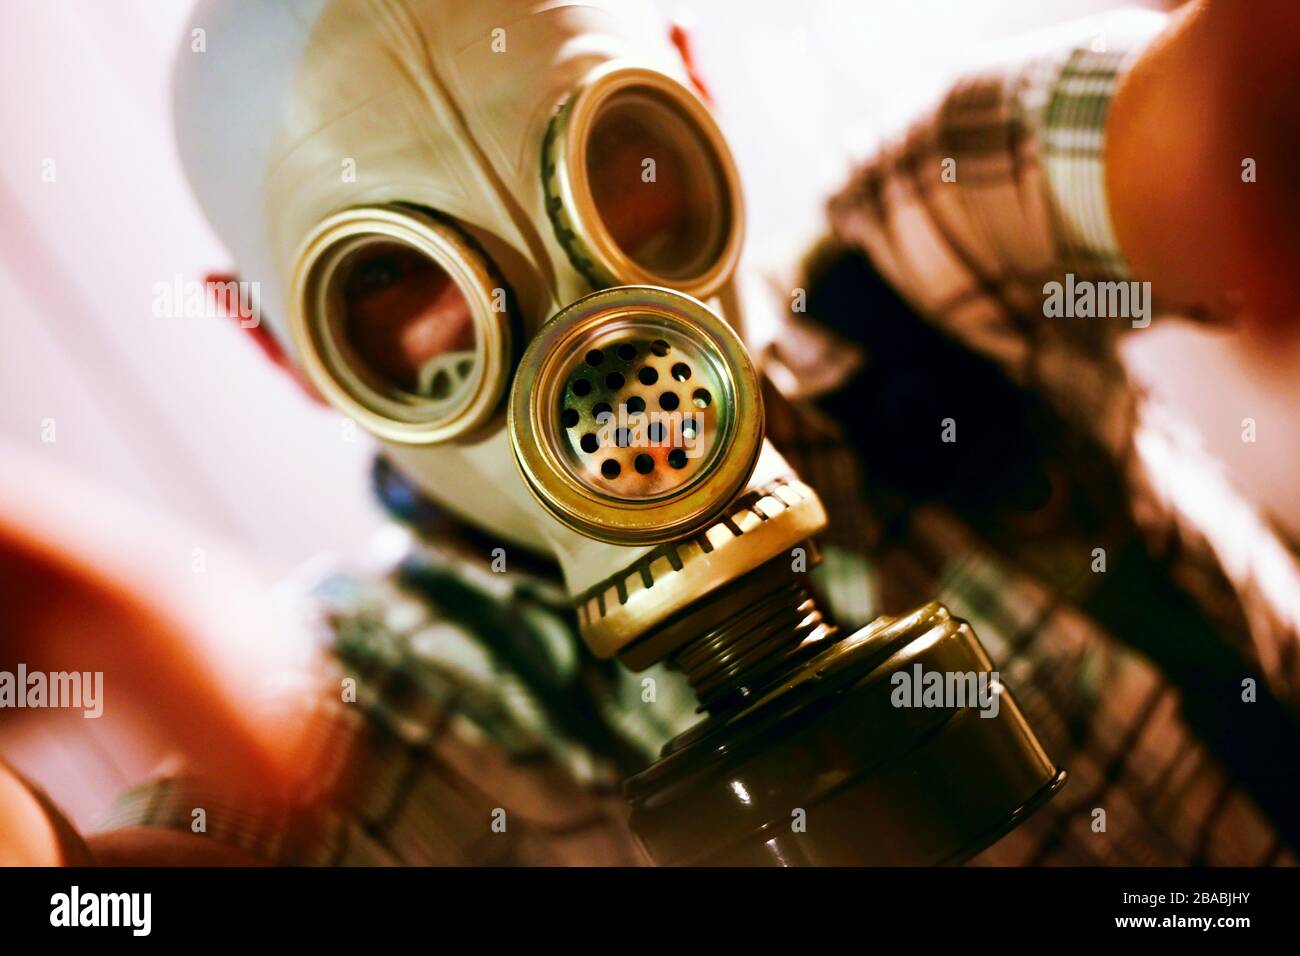 Man in a gas mask on night street Stock Photo